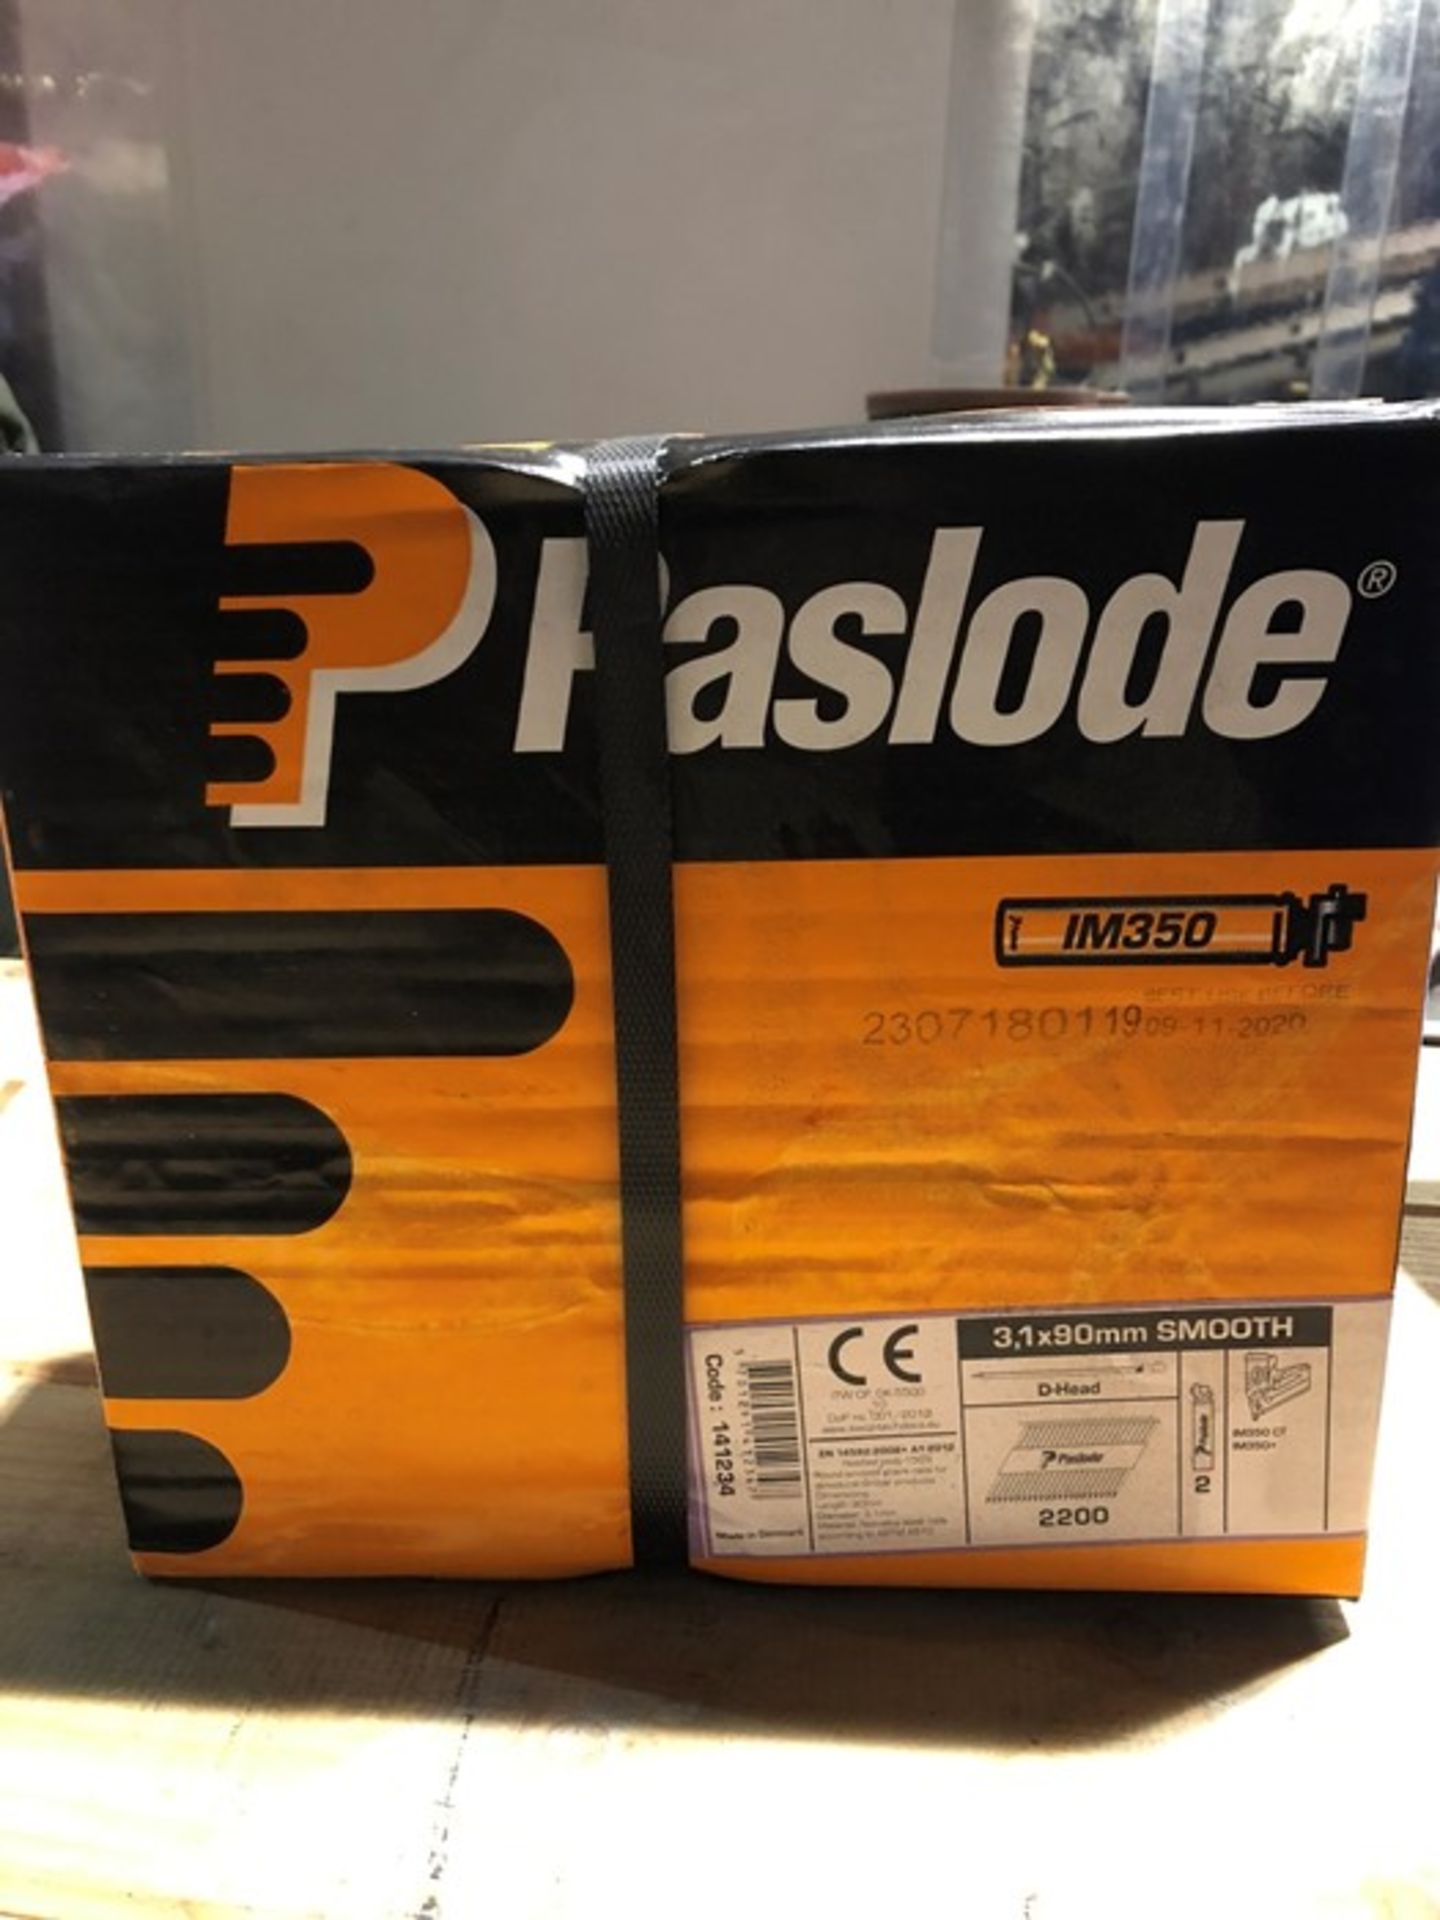 1 BOX OF PASLODE IM350 SMOOTH D-HEAD NAILS WITH 2 FUEL CELLS - APPROX 2200 NAILS PER BOX / SIZE: 3.1